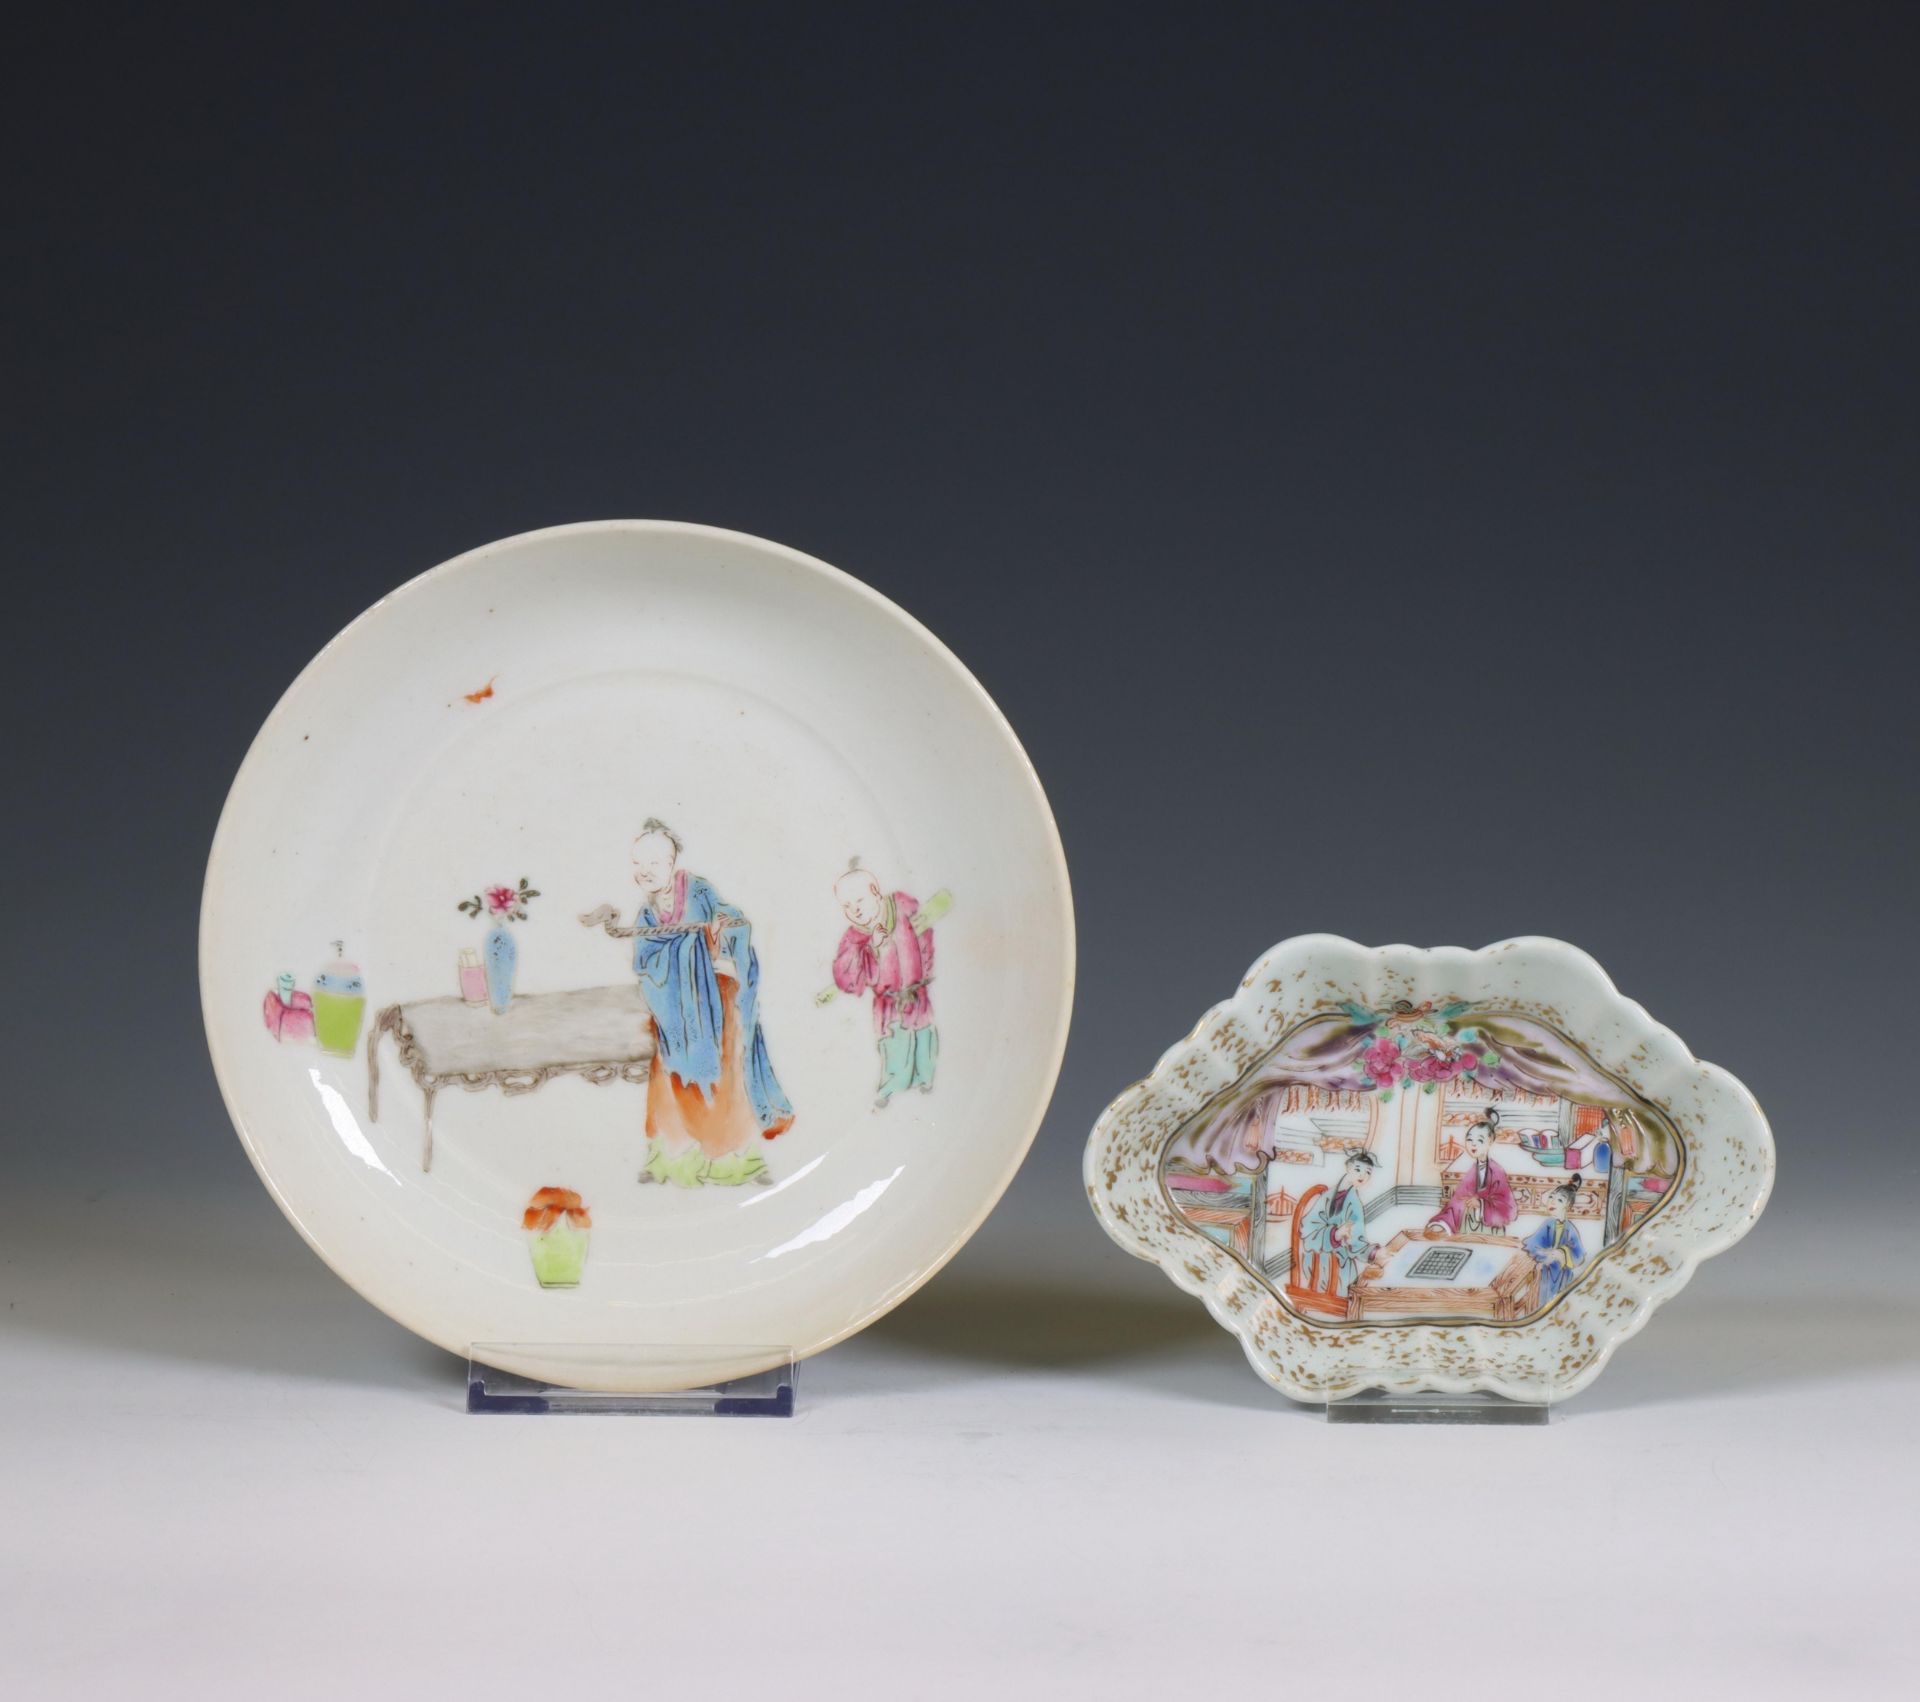 China, two famille rose porcelain dishes, late 18th-19th century,